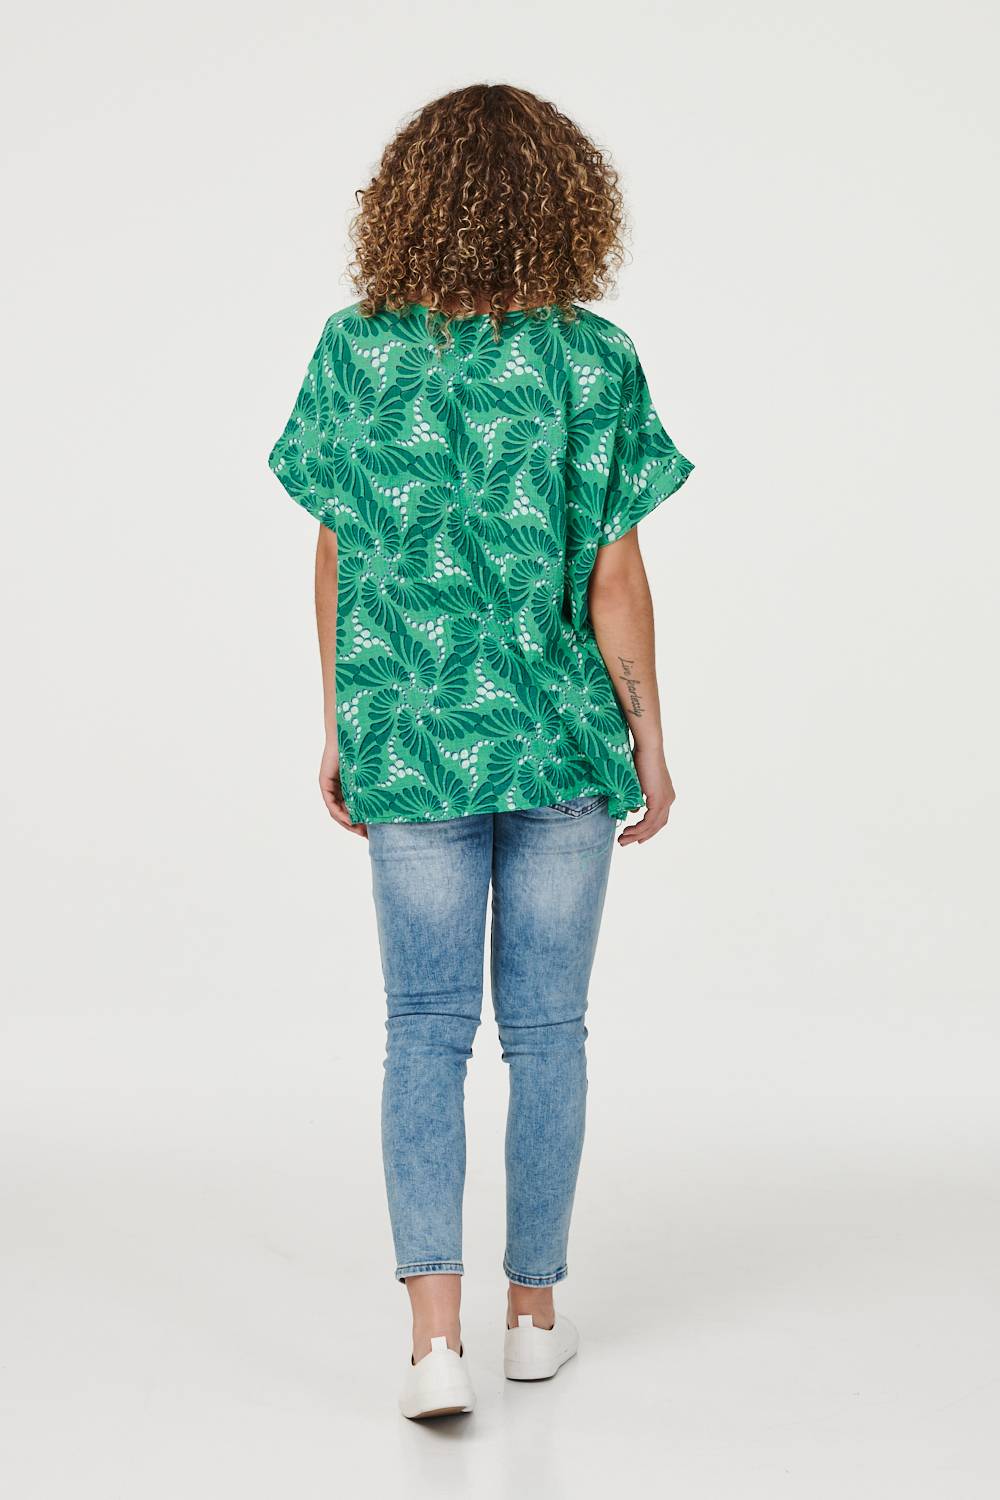 Green | Retro Print Blouse with Necklace